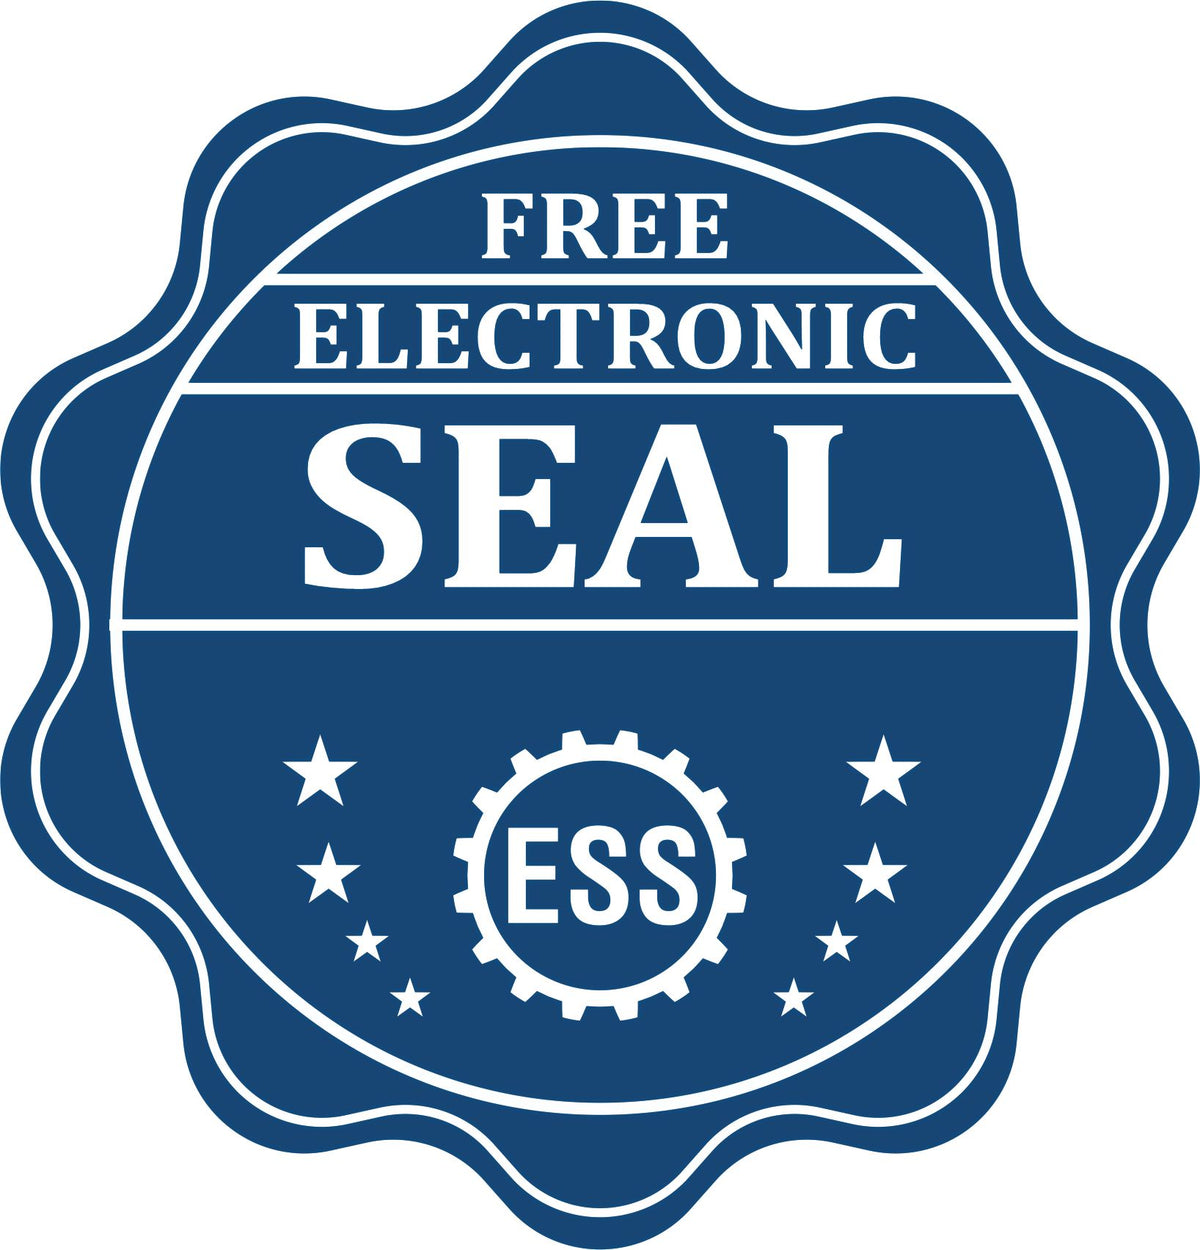 A badge showing a free electronic seal for the District of Columbia Soft Land Surveyor Embossing Seal with stars and the ESS gear on the emblem.